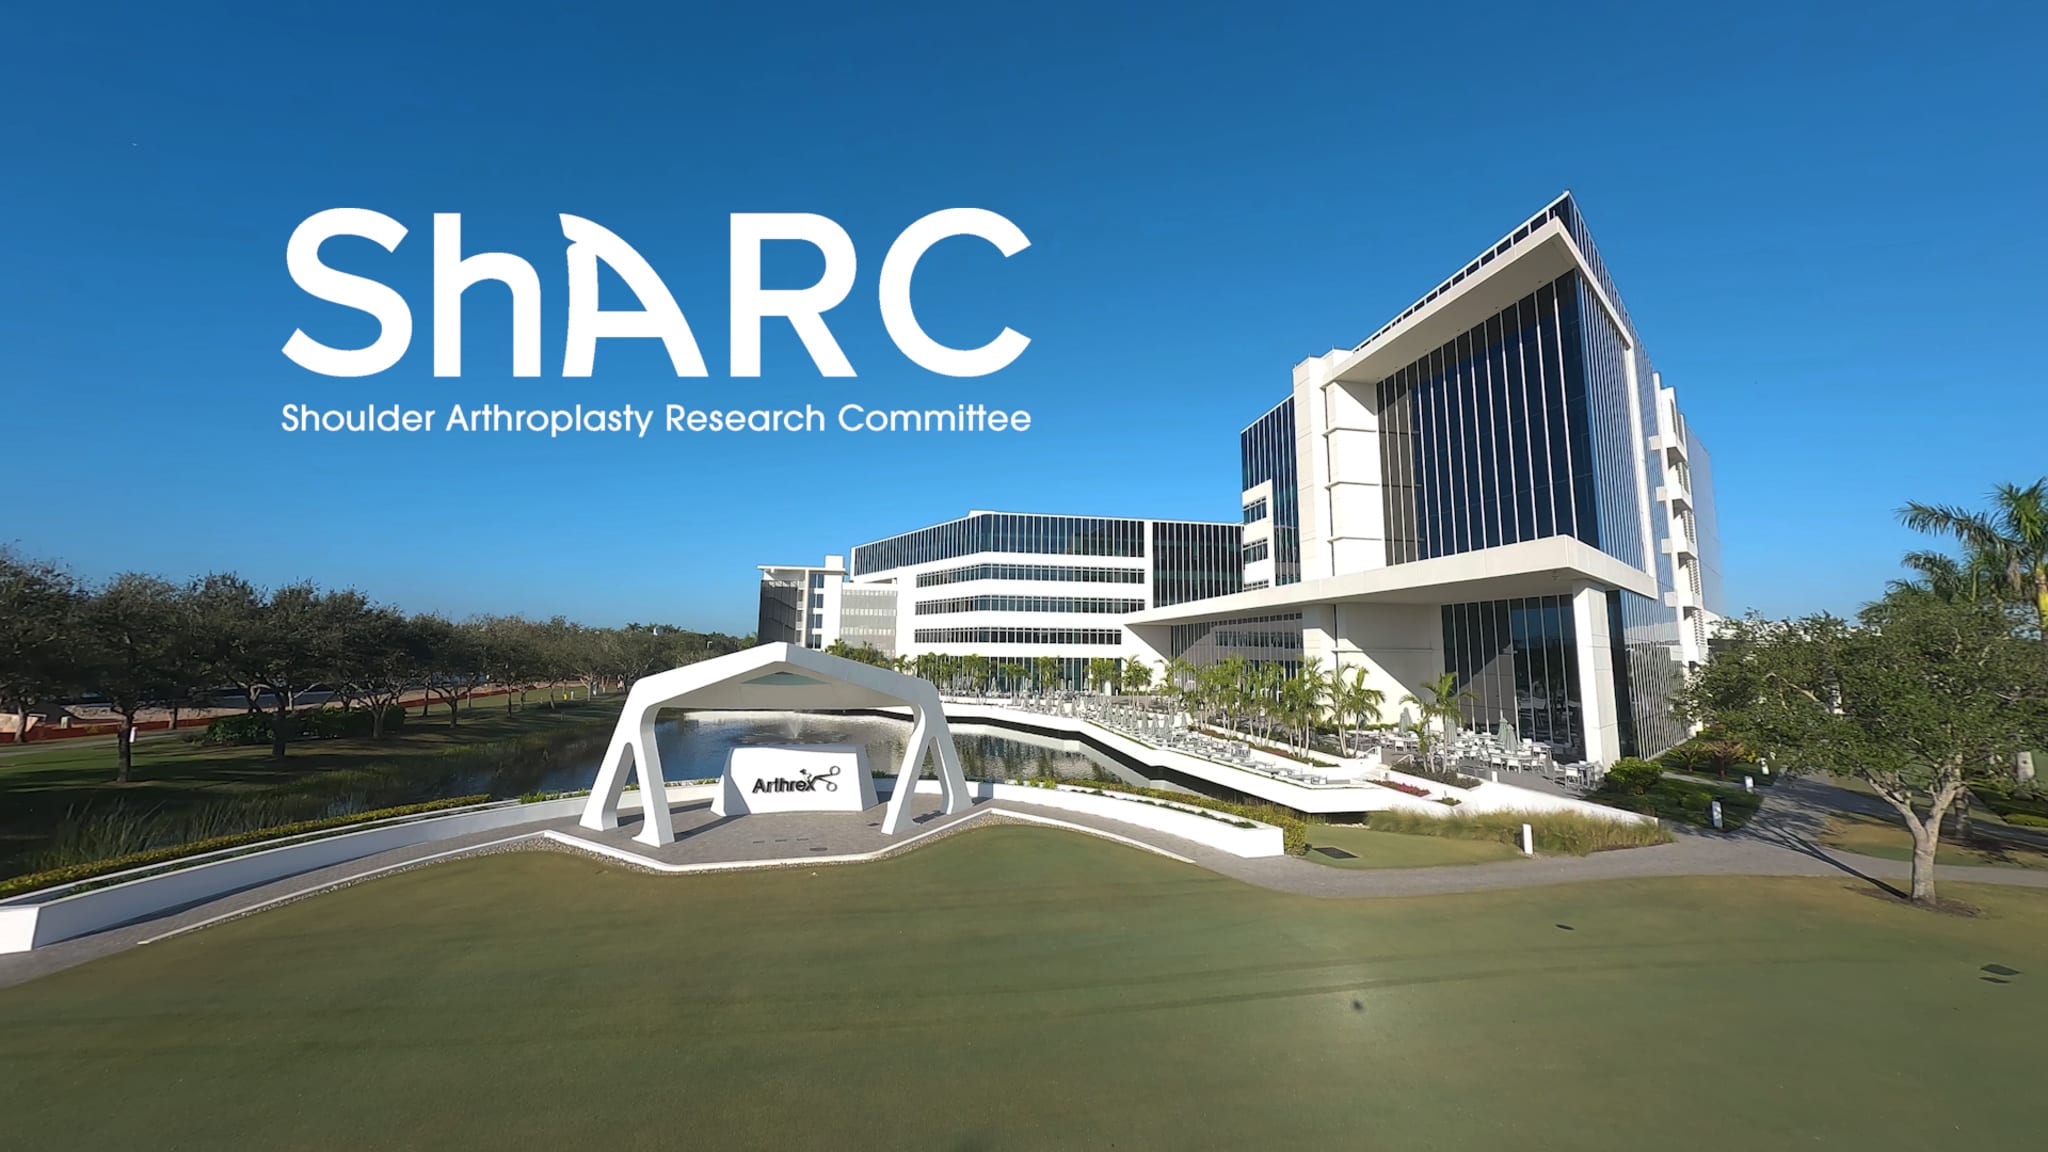 Shoulder Arthroplasty Research Committee (ShARC)